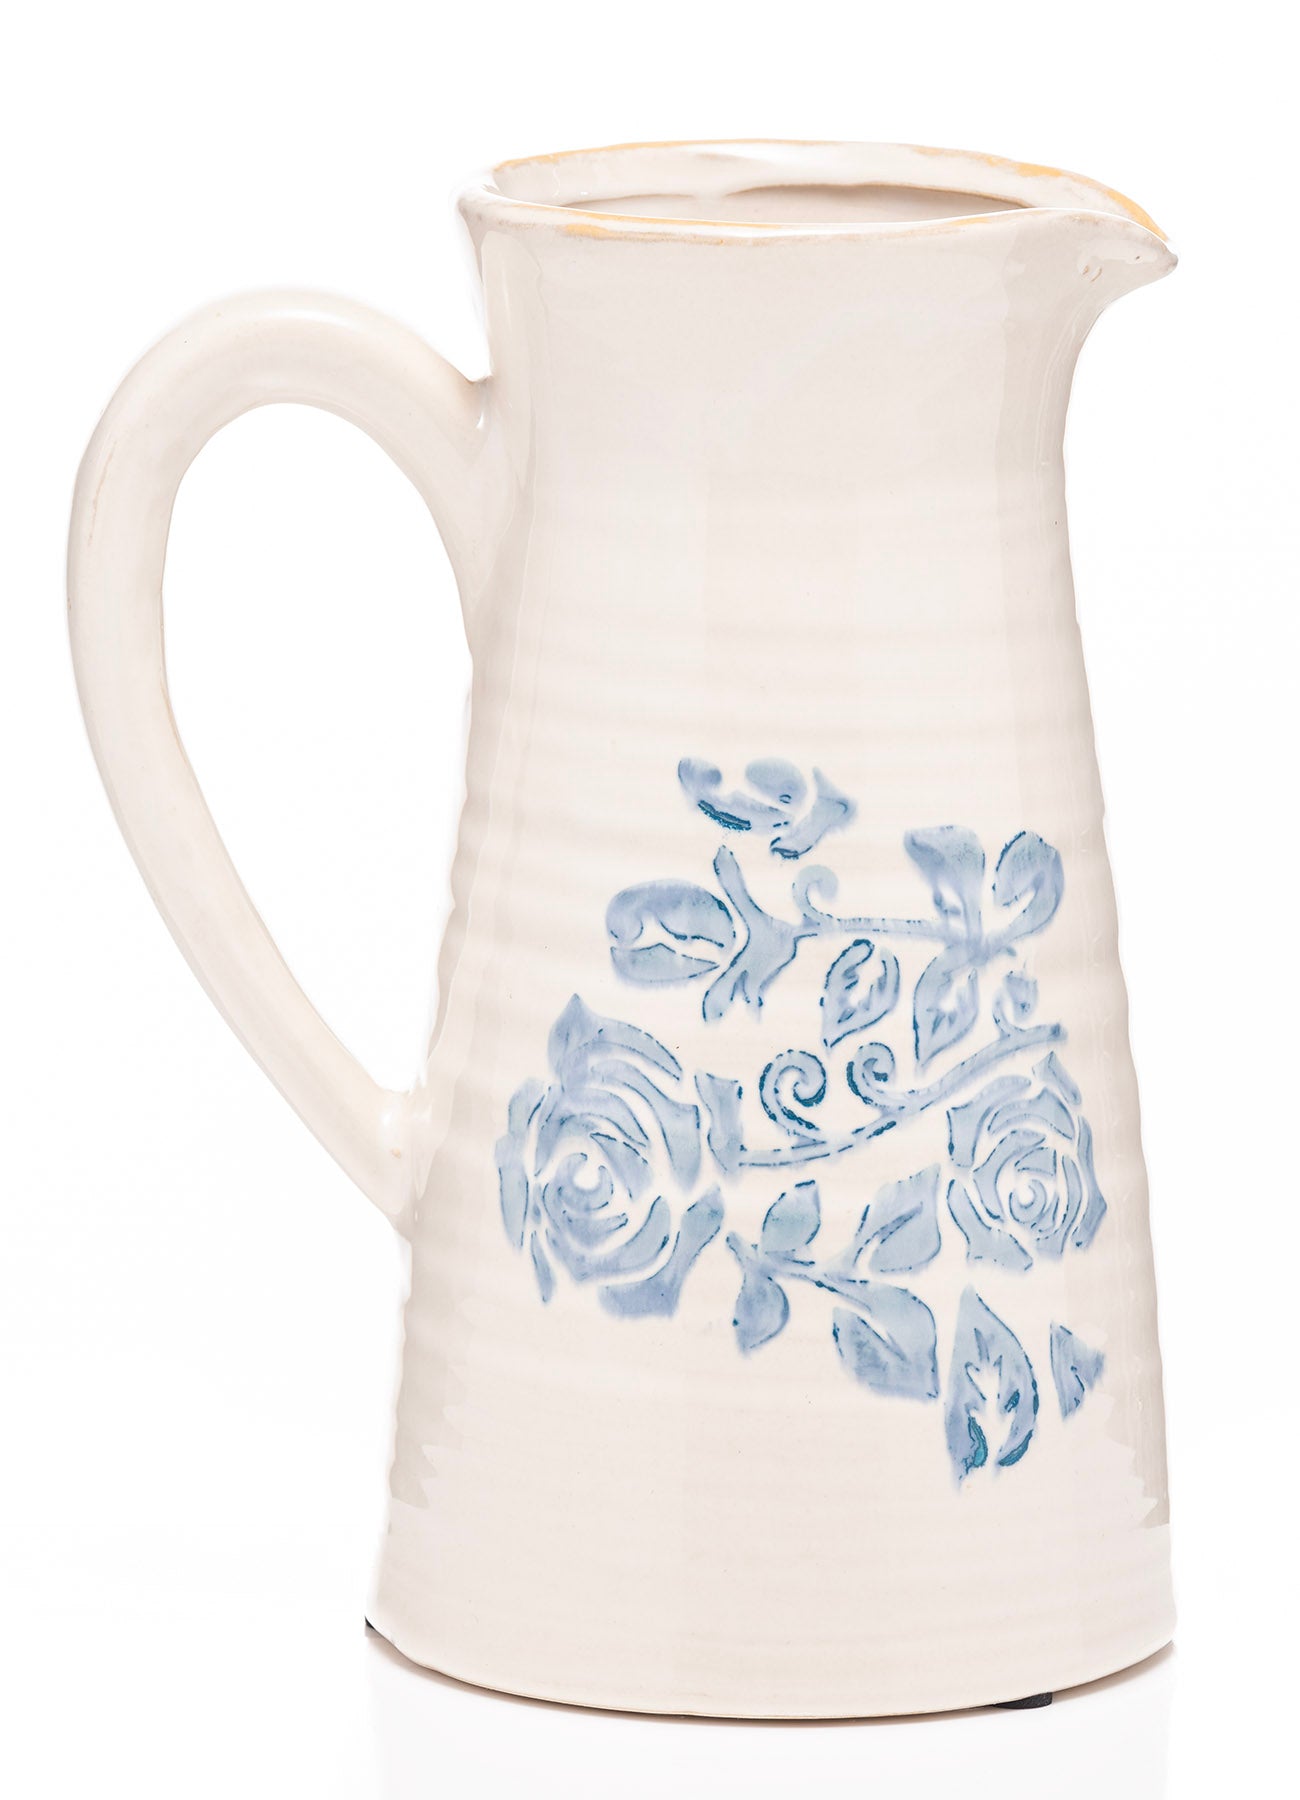 The Grange Collection Decorative Jug 1 Shaws Department Stores